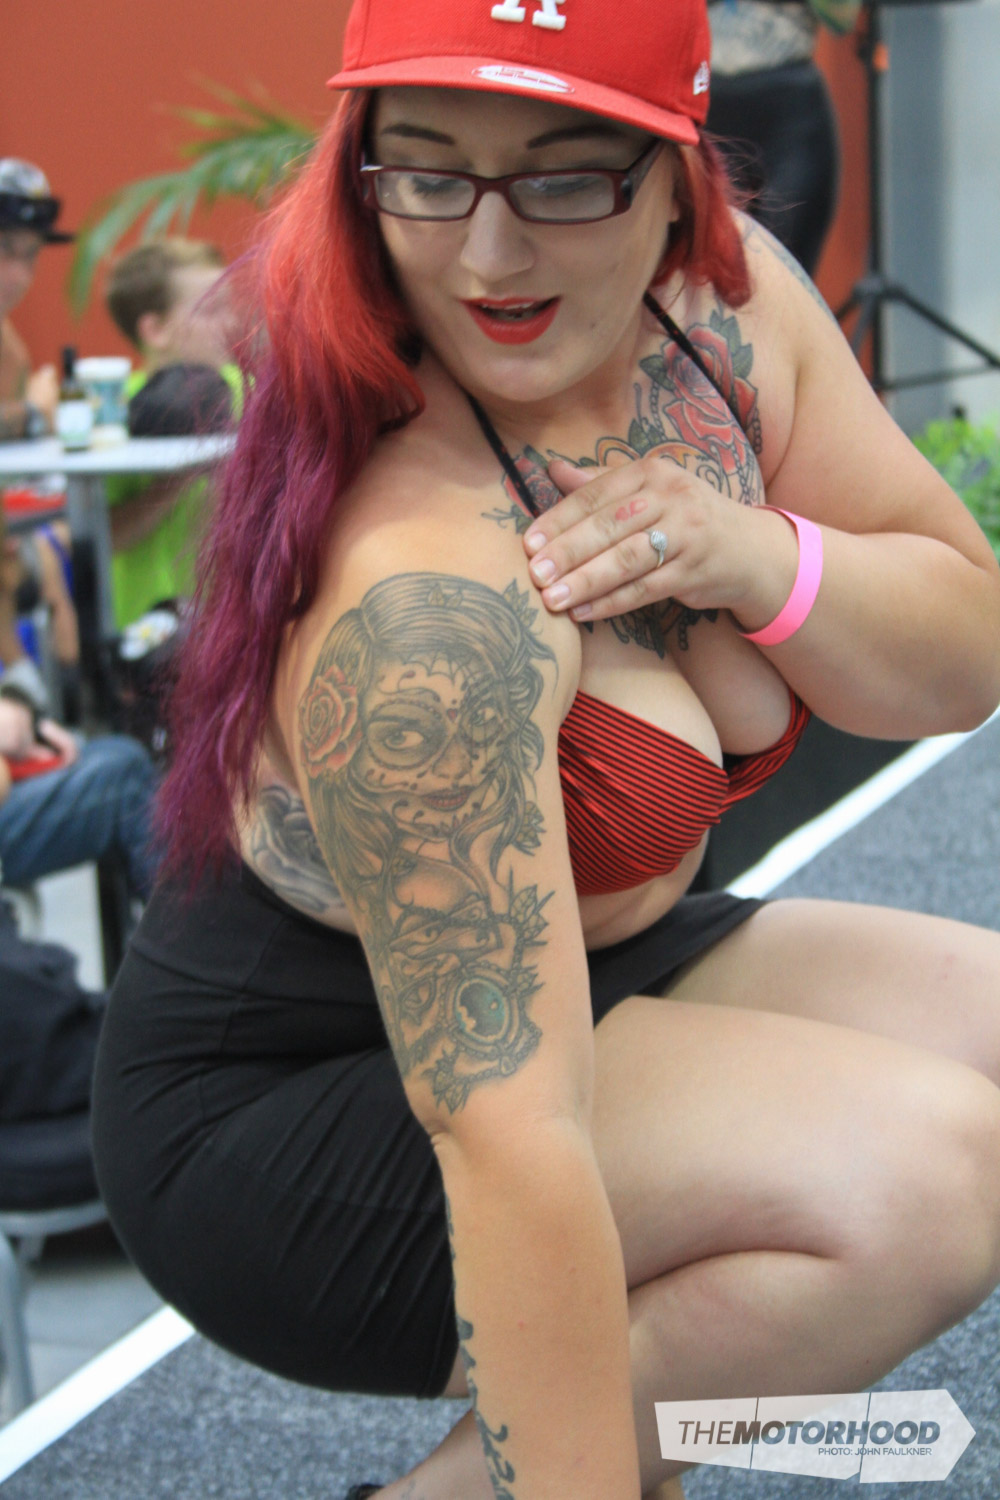 Sammy Strickland was awarded third place in Miss Tattoo 2015